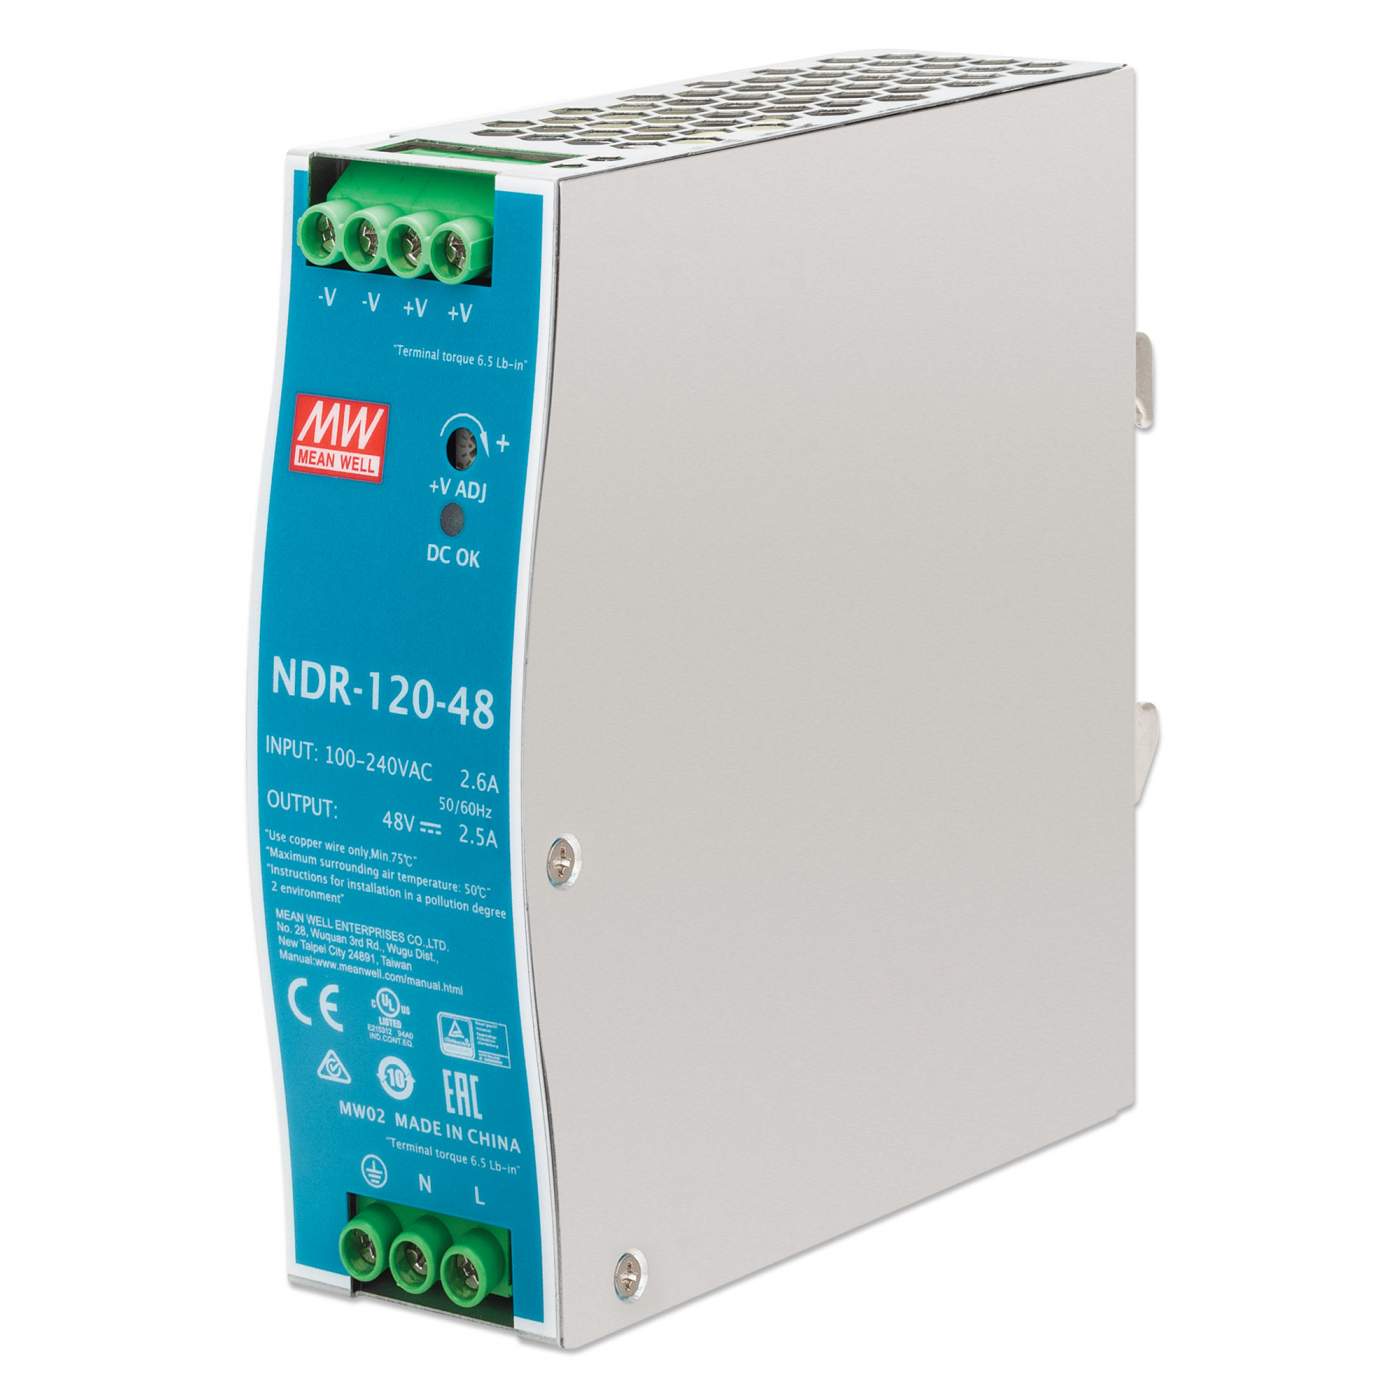 DIN rail-mounted industrial power-supply fundamentals